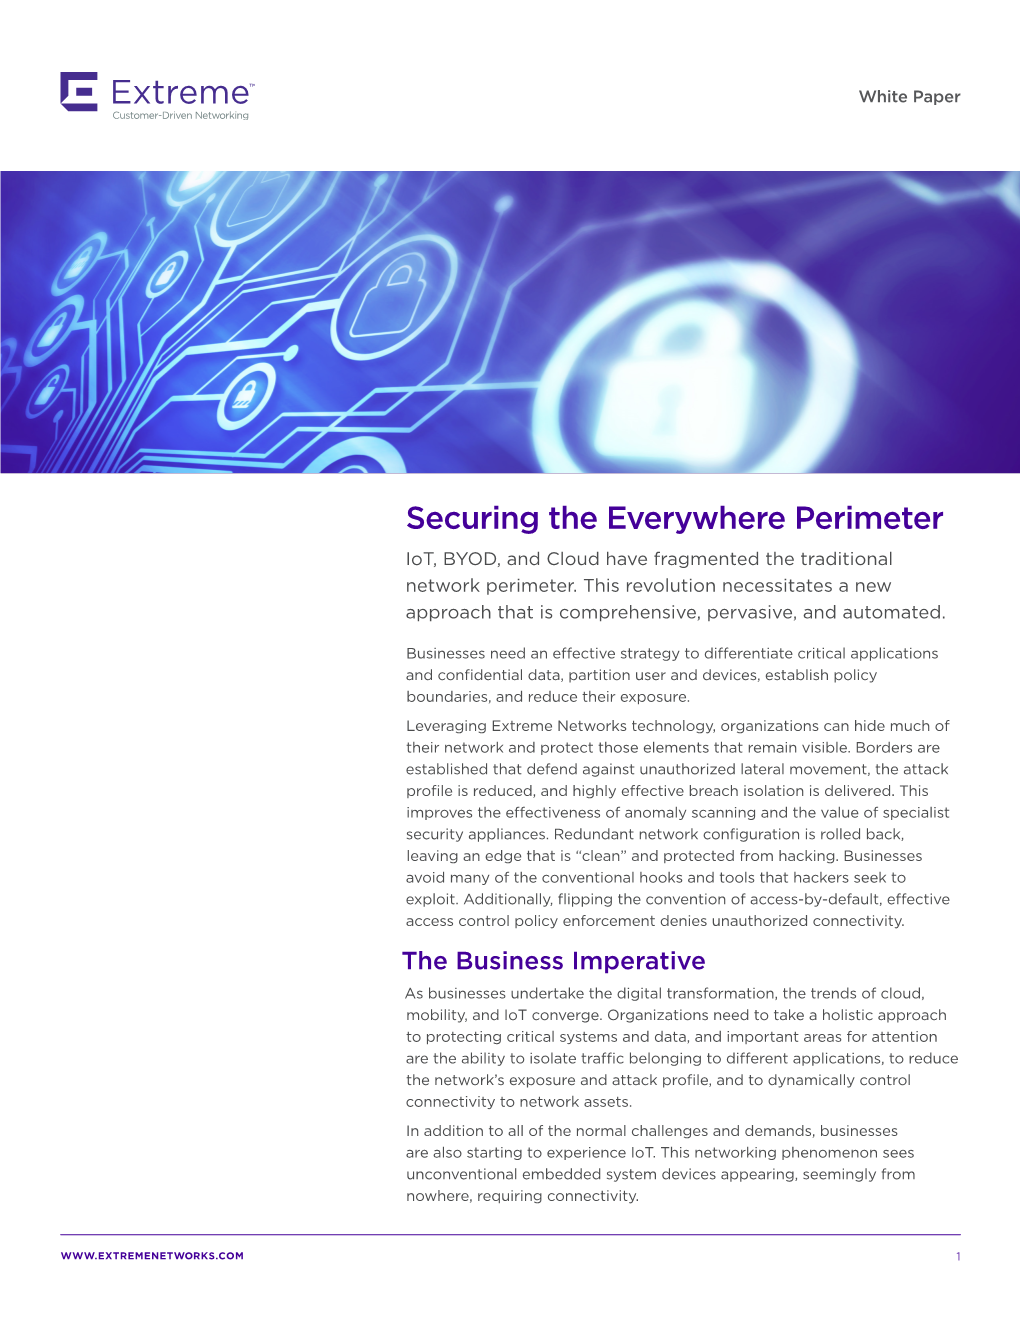 Securing the Everywhere Perimeter Iot, BYOD, and Cloud Have Fragmented the Traditional Network Perimeter